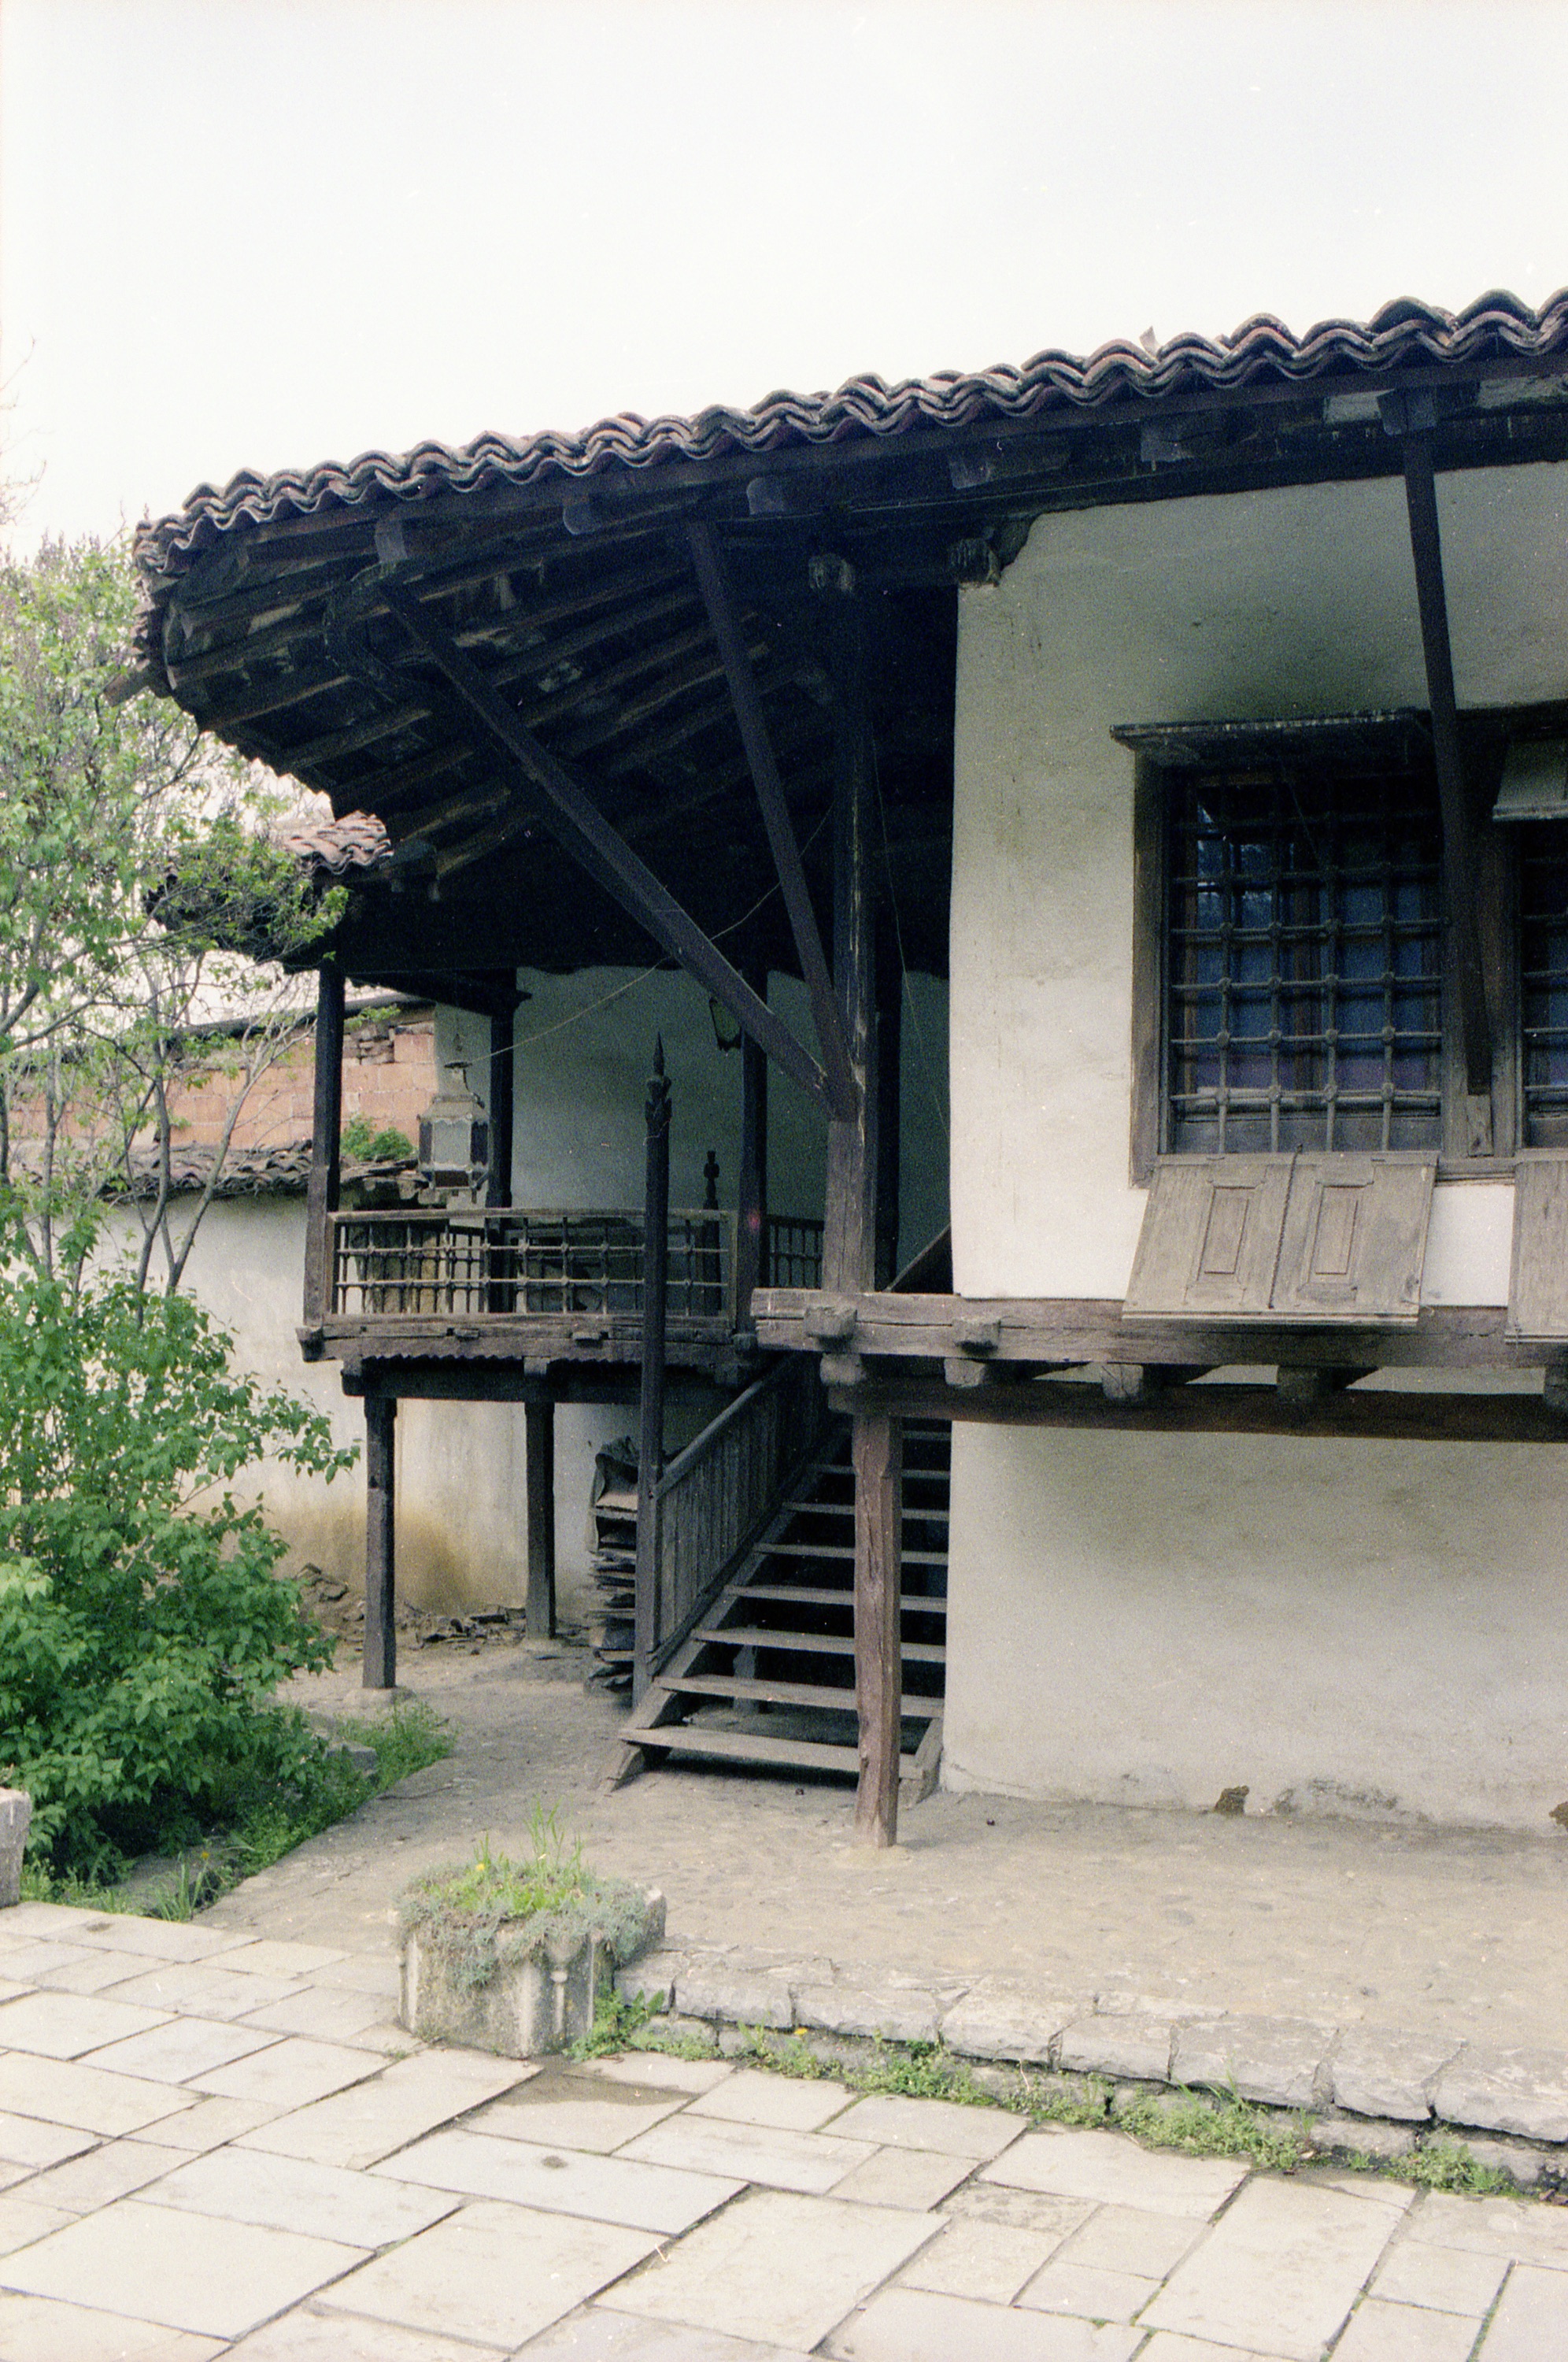 <p>This 18th century house, with its čardak (raised porch) sits within a walled garden to which it was relocated as part of the Ethnological Museum in Priština. In 1991 the interior cabinetry and some built-in furniture was in place along with artifacts of the period when it was built. One can see, under the stairway, timber for ongoing work. The broad roof projections are supported by pronounced brackets that connect to posts rather than to the wall. The interlocking beams, supporting the čardak deck, contain decorative notched patterns.</p>